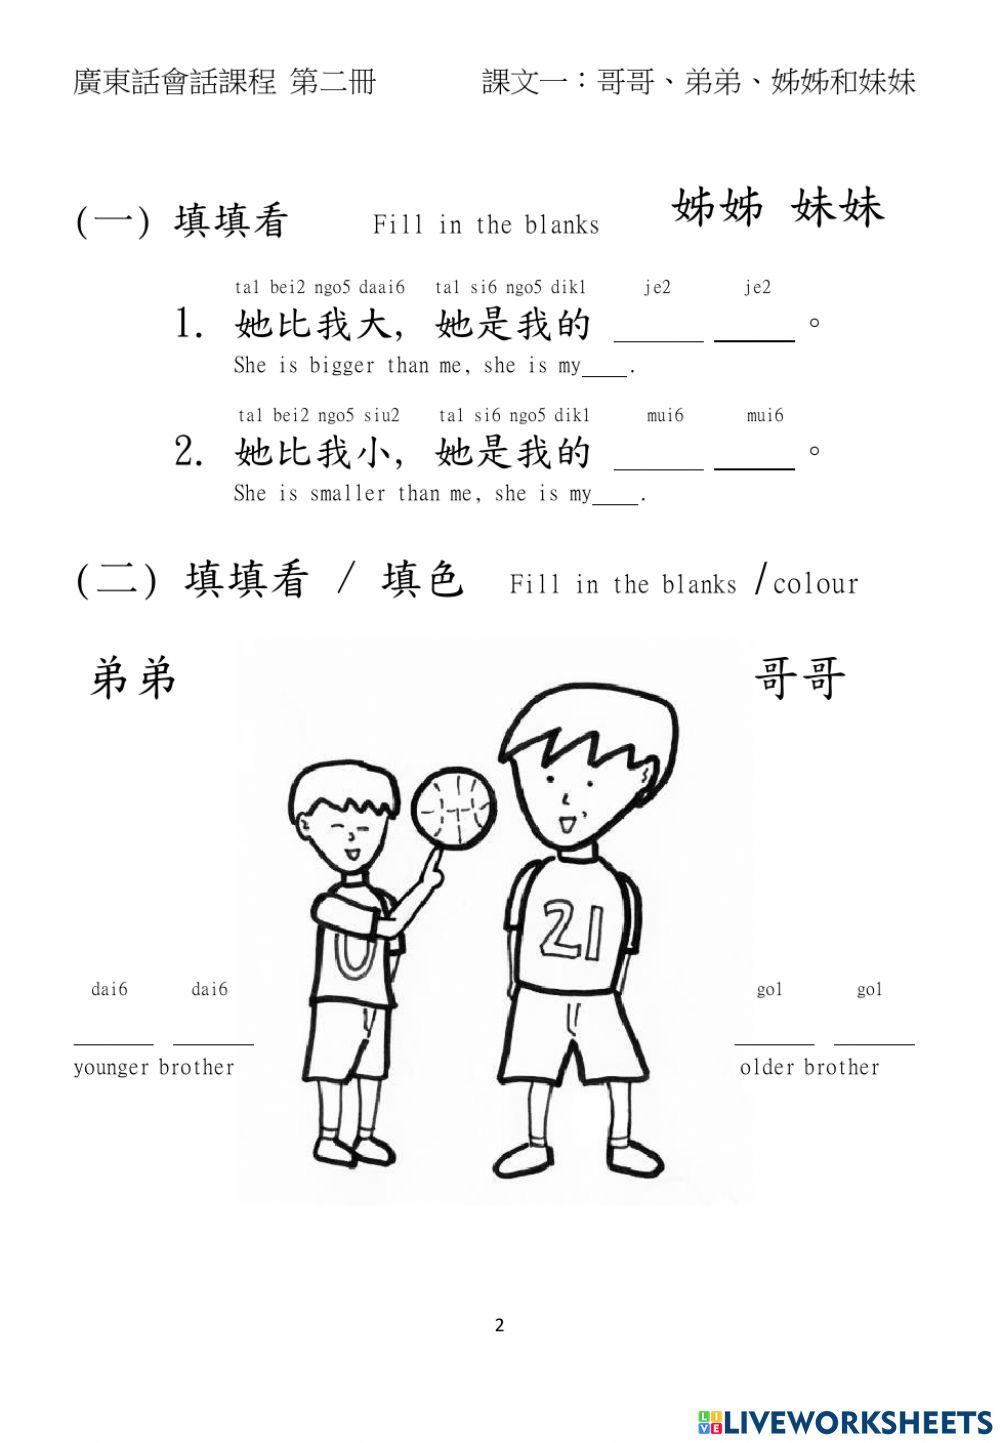 Mon sheong chinese school C2 page 1-3